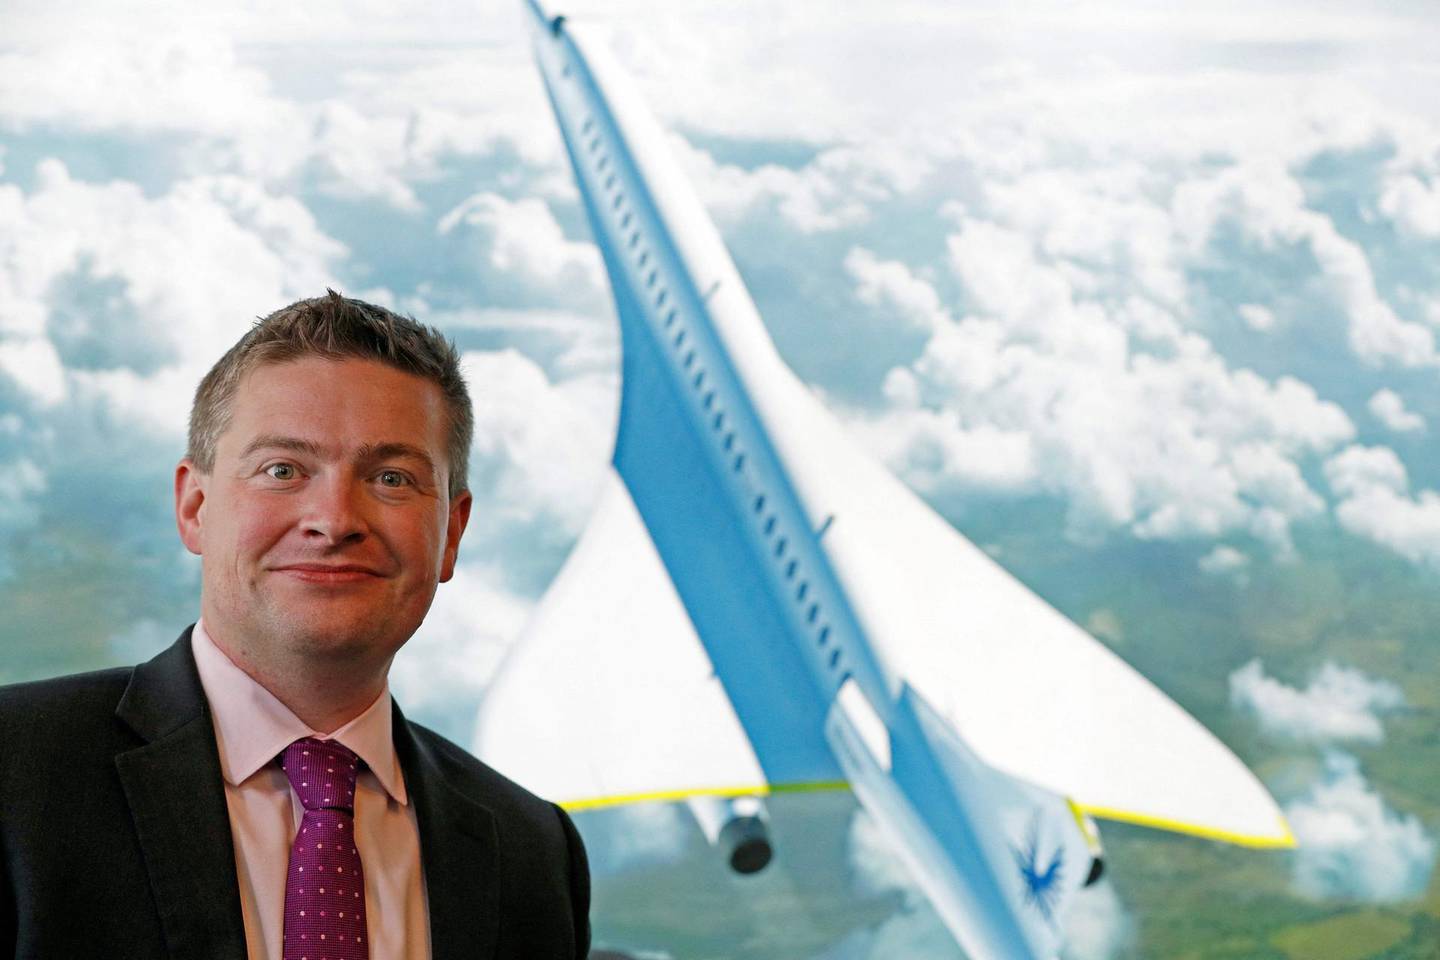 (FILES) In this file photo taken on July 18, 2018, Boom Supersonic co-founder, Blake Scholl, poses for a photograph in front of an artists impression of his company's proposed design for an supersonic aircraft, dubbed Baby Boom, at the Farnborough Airshow, southwest of London.  United Airlines announced plans on June 3, 2021, to buy 15 planes from airline startup Boom Supersonic in a move that could revive the high-speed form of air travel. Under the commercial agreement, United would purchase Boom's "Overture" aircraft once the planes meet "United's demanding safety, operating and sustainability requirements" with an aim to start passenger travel in 2029, the companies said in a joint press release.
 / AFP / Adrian DENNIS
